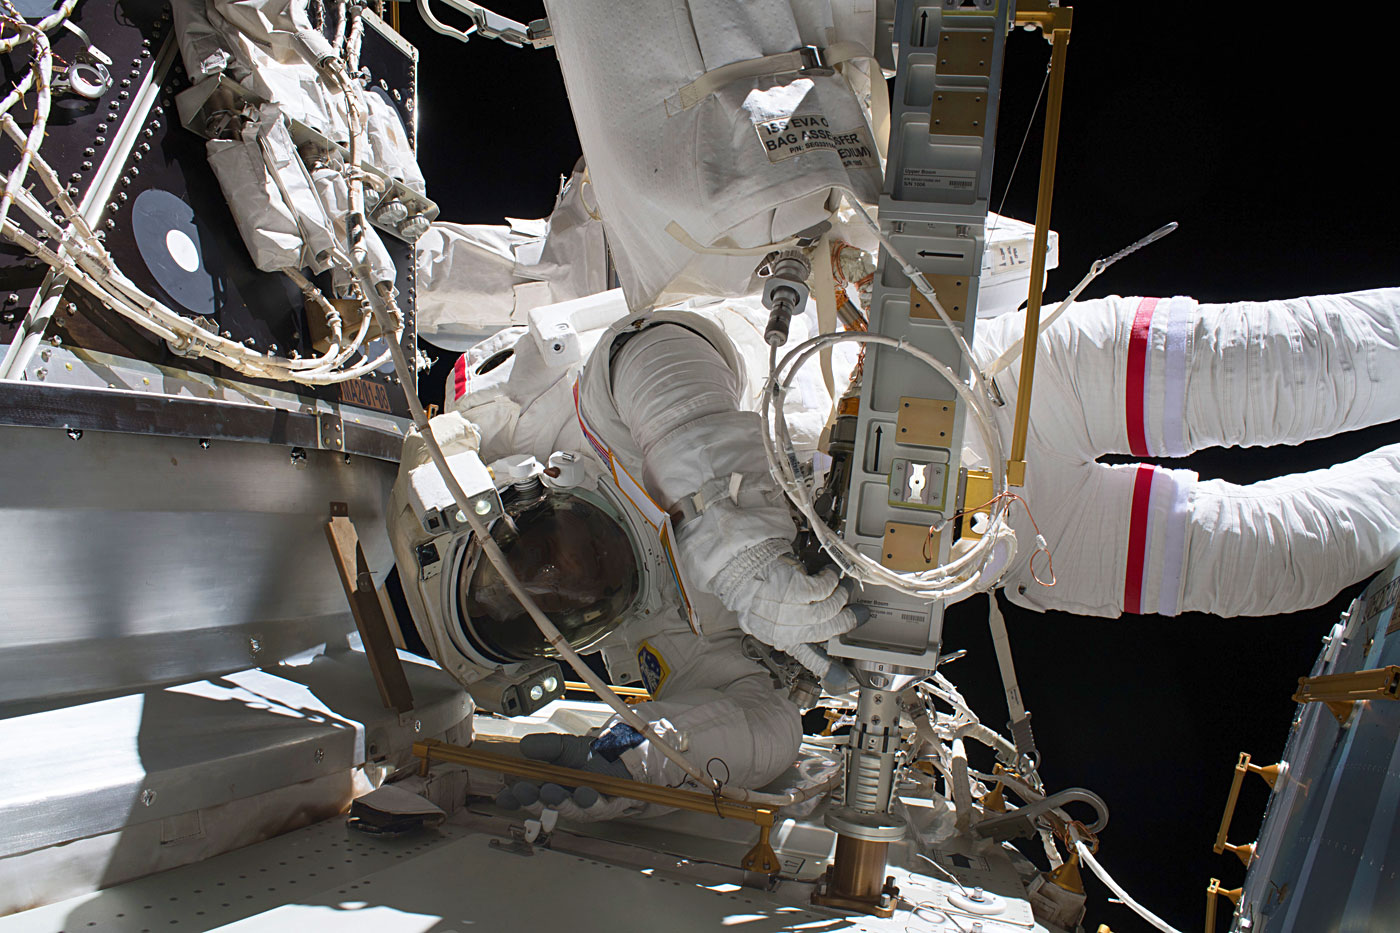 Featured image for “A Shot From Above – WIF Probes Being Installed On The ISS”